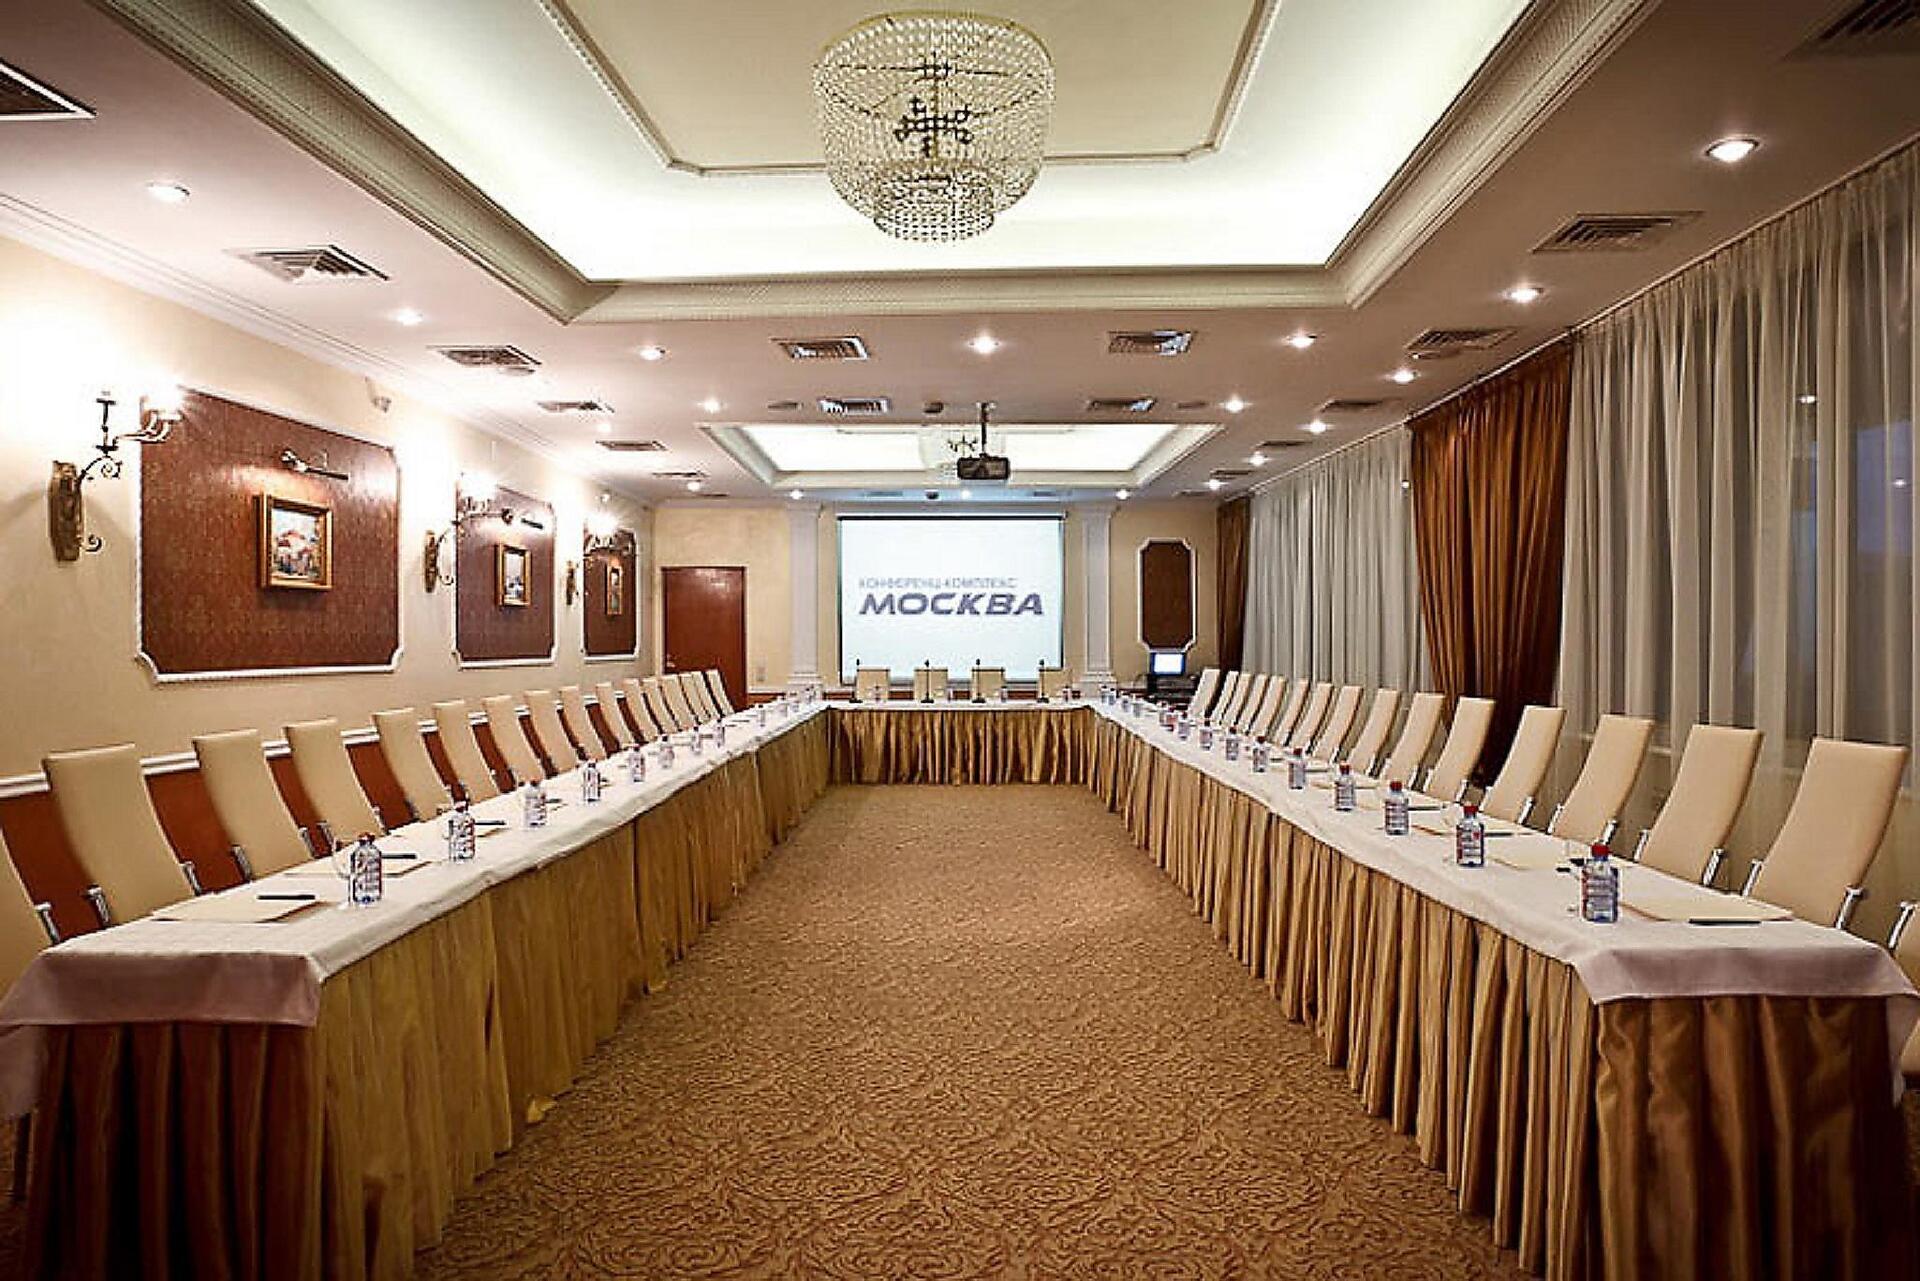 Moscow Hotel: Conferences